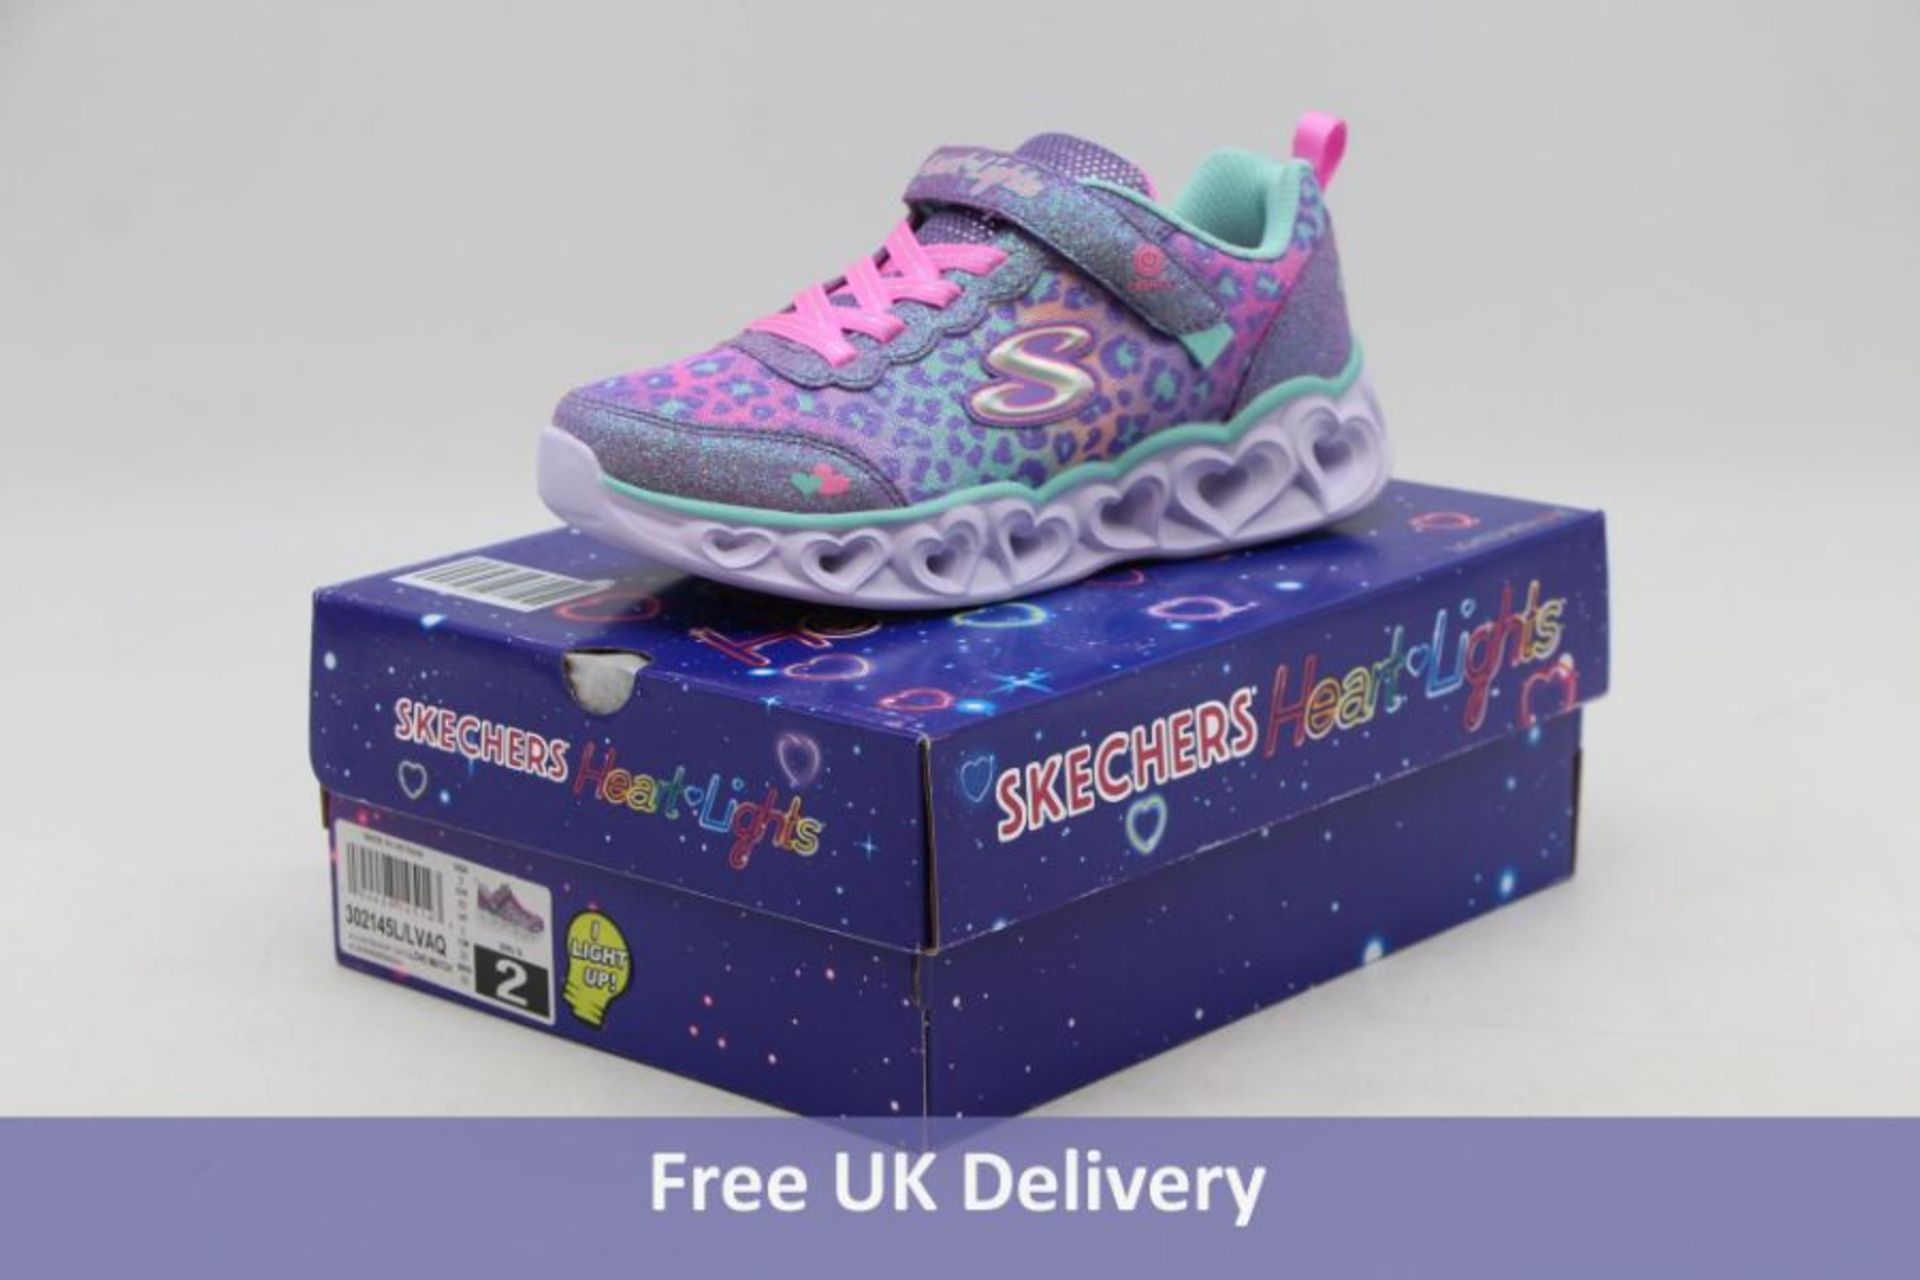 Three Skechers Kid's Trainers to include 1x Heart Lights Shimmer, Lavender/Aqua, UK 1 and 2x Heart L